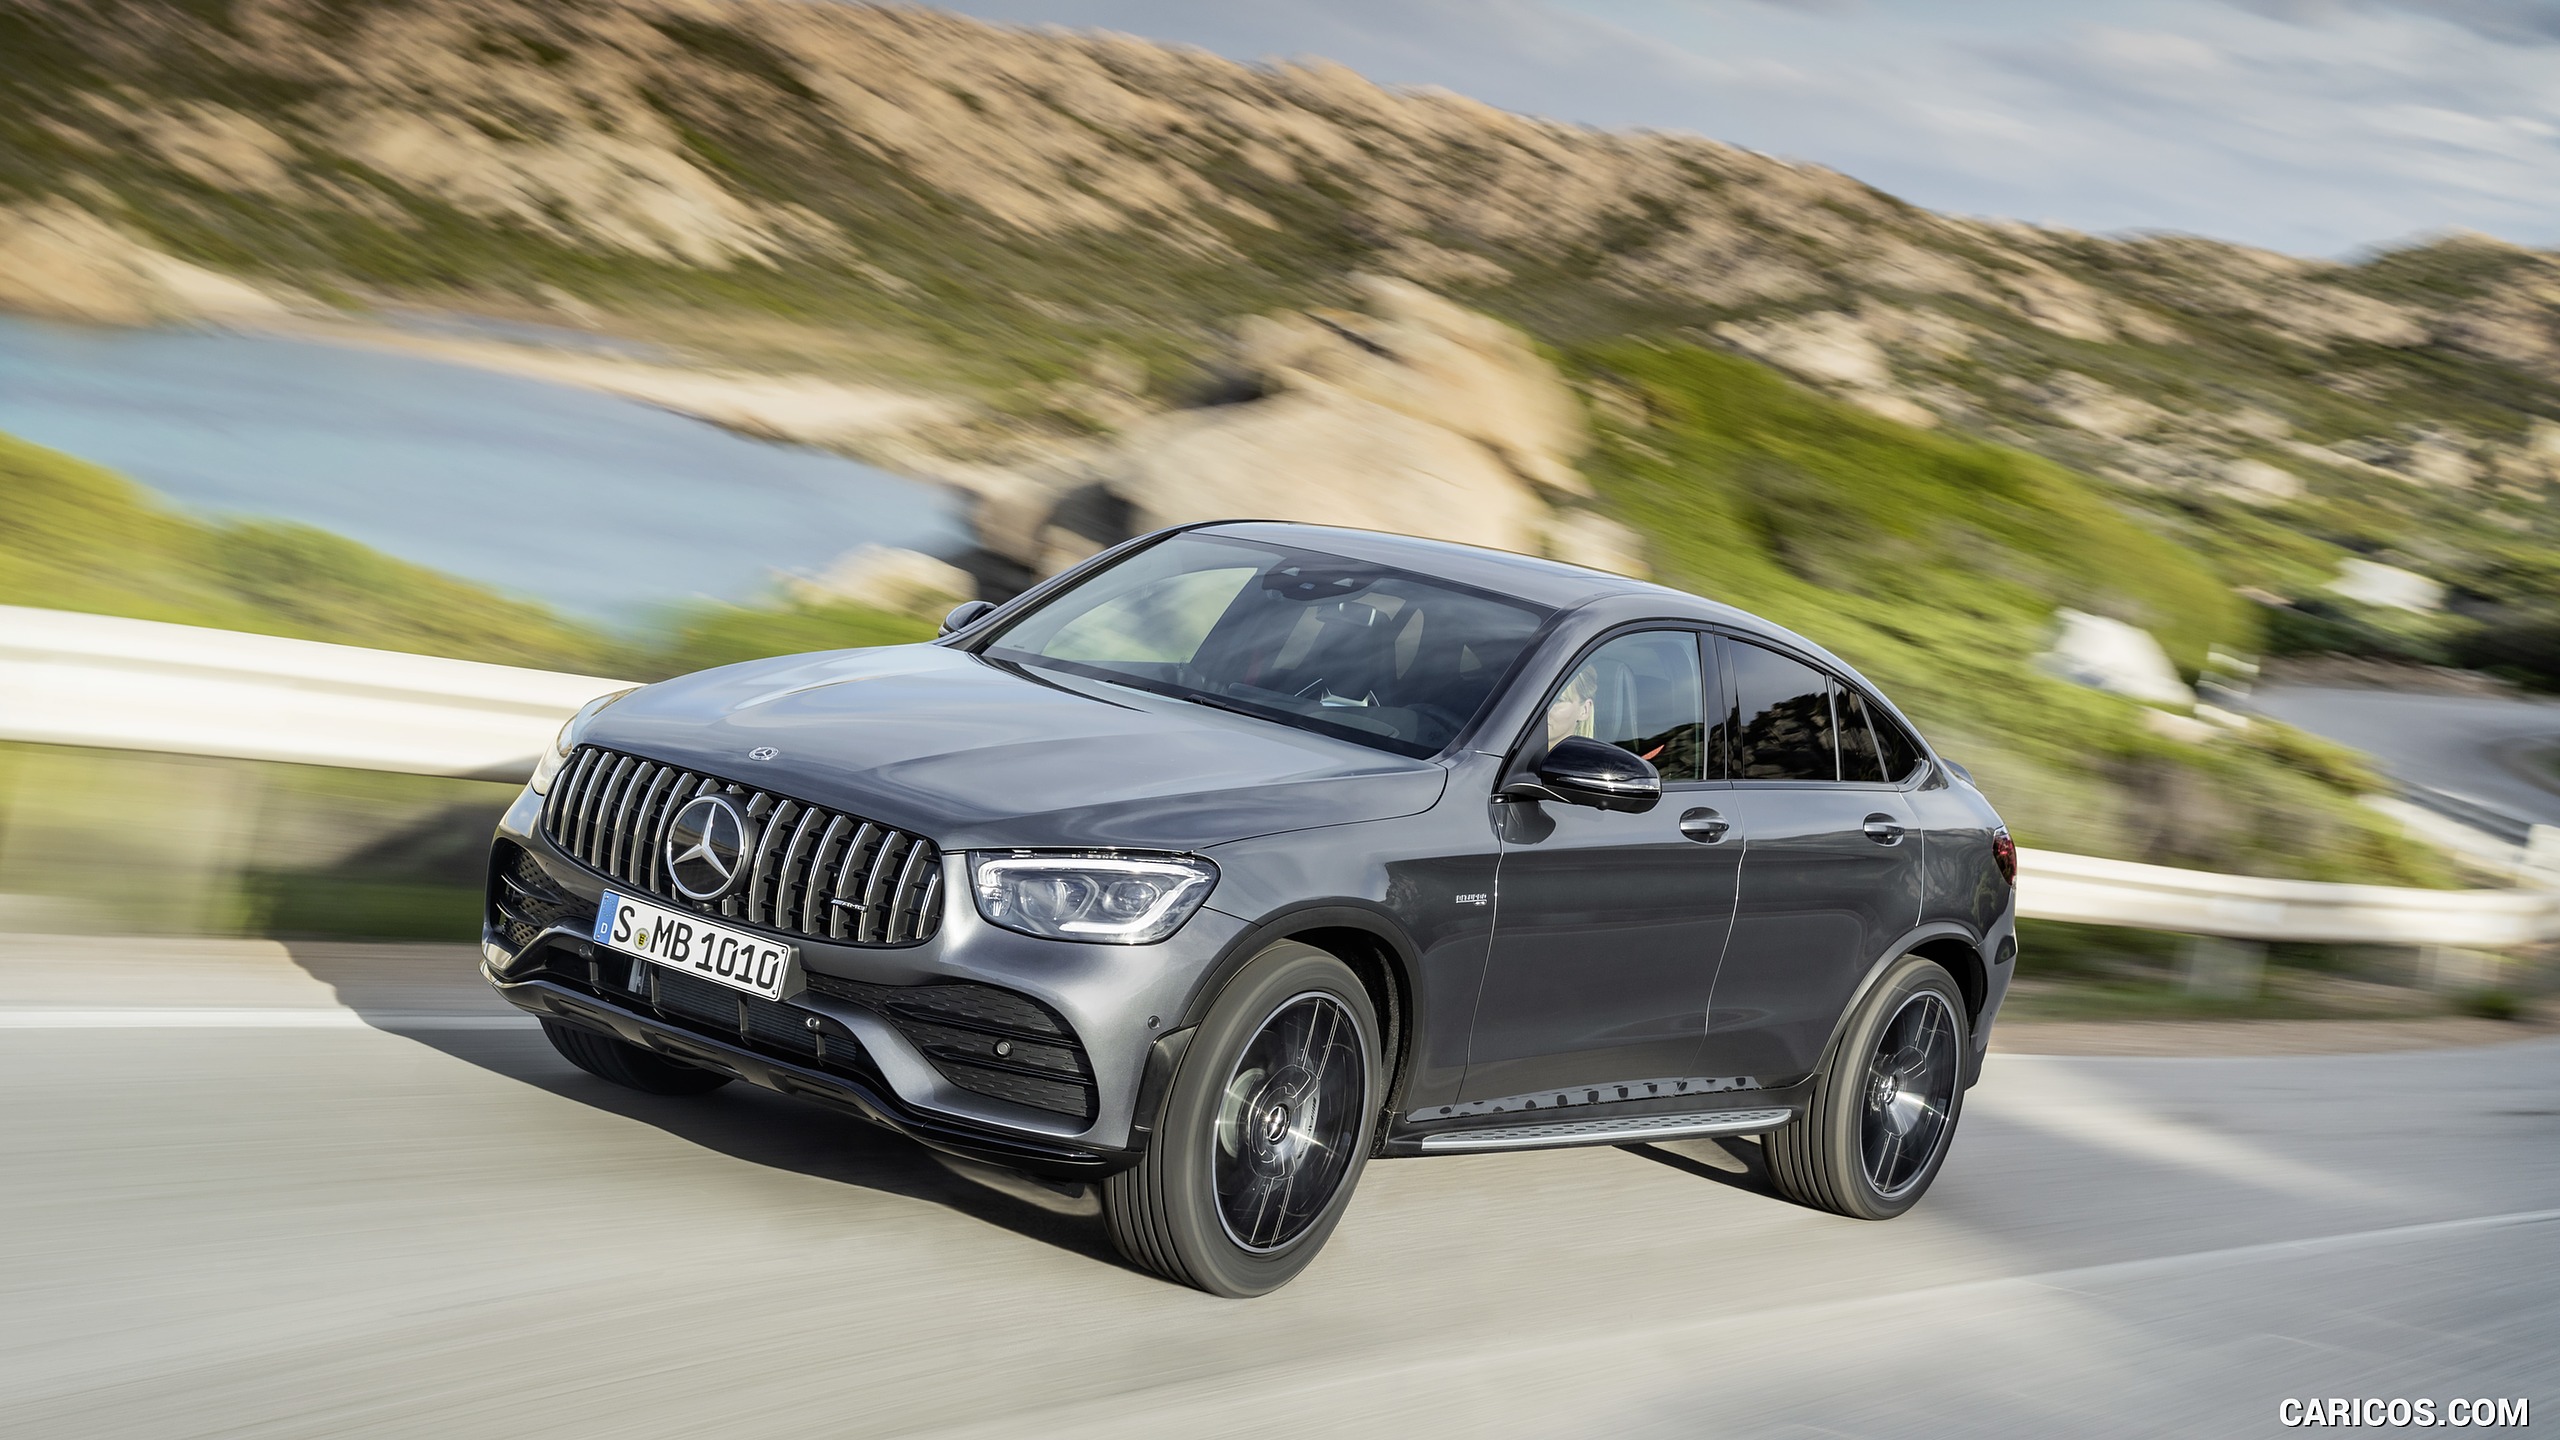 2020 Mercedes-AMG GLC 43 4MATIC Coupe - Front Three-Quarter, #3 of 173